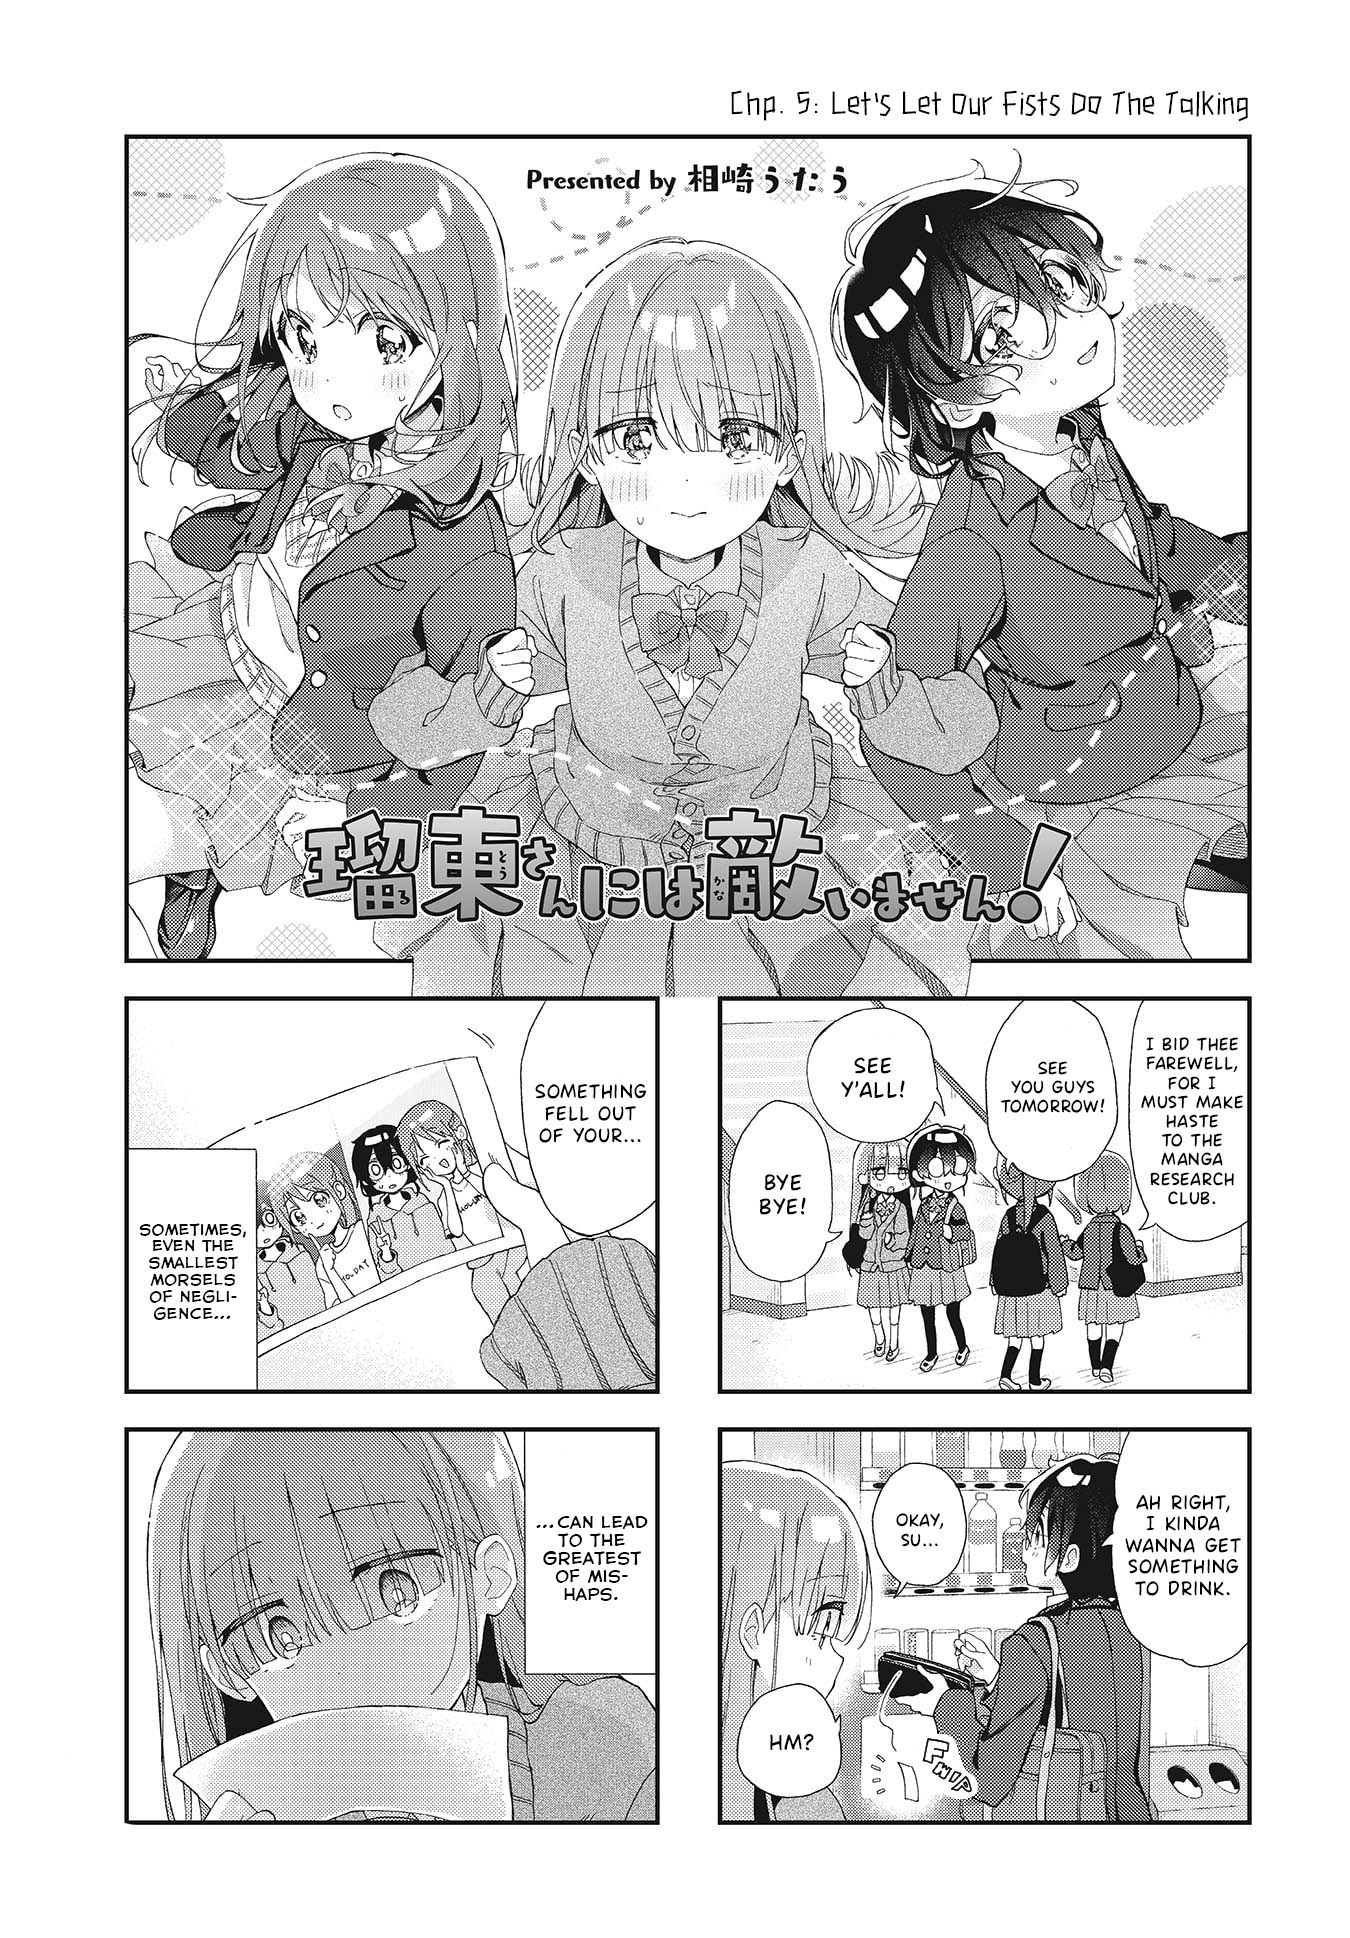 Rutou-San Ni Wa Kanaimasen! Vol.1 Chapter 5: Let's Let Our Fists Do The Talking - Picture 1